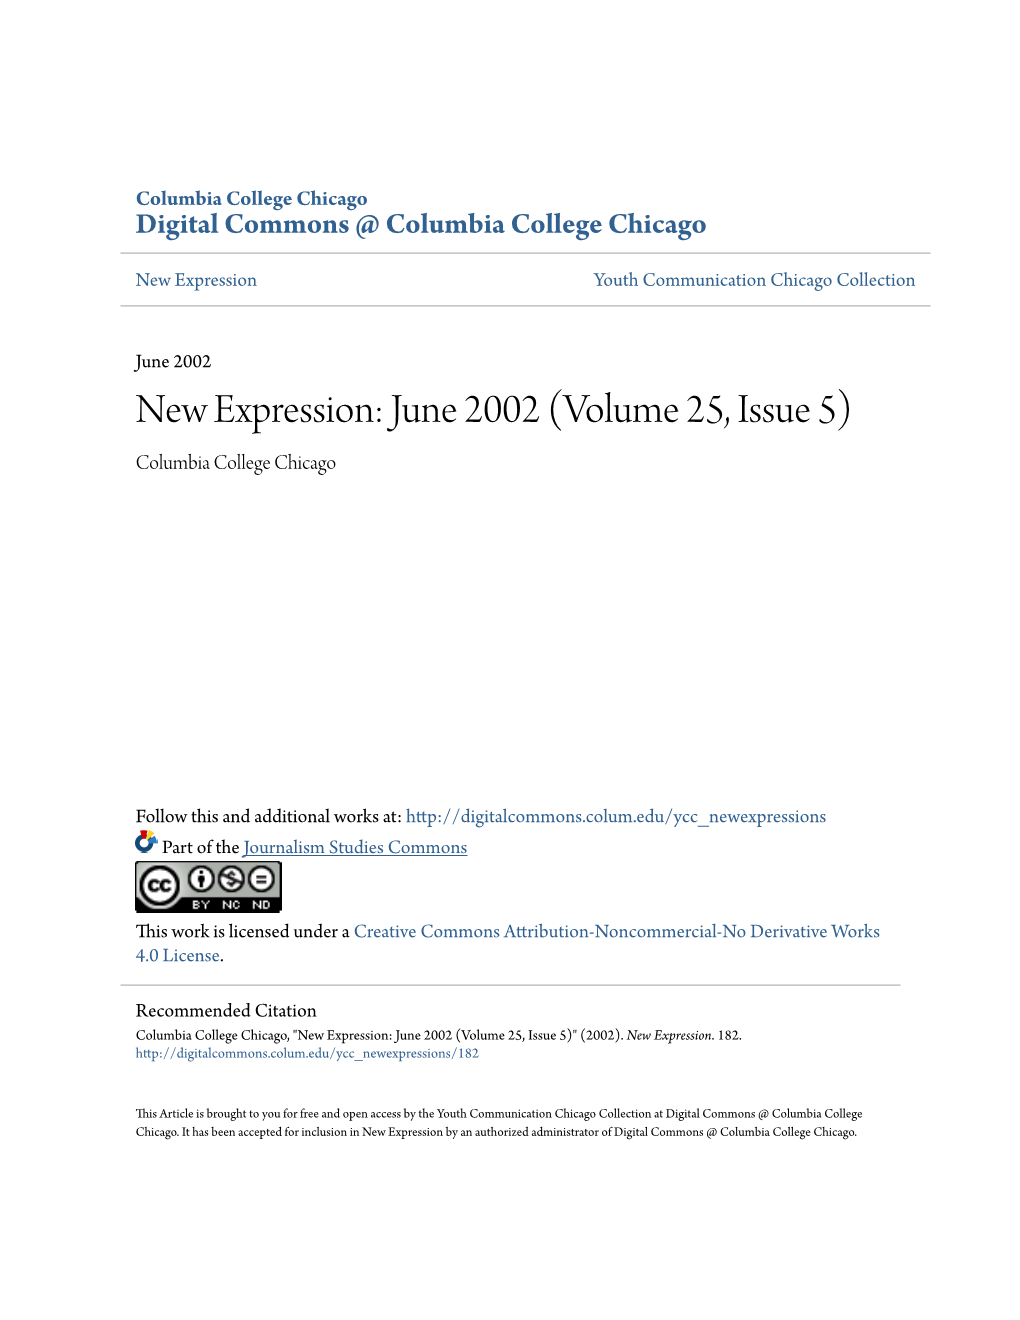 New Expression: June 2002 (Volume 25, Issue 5) Columbia College Chicago